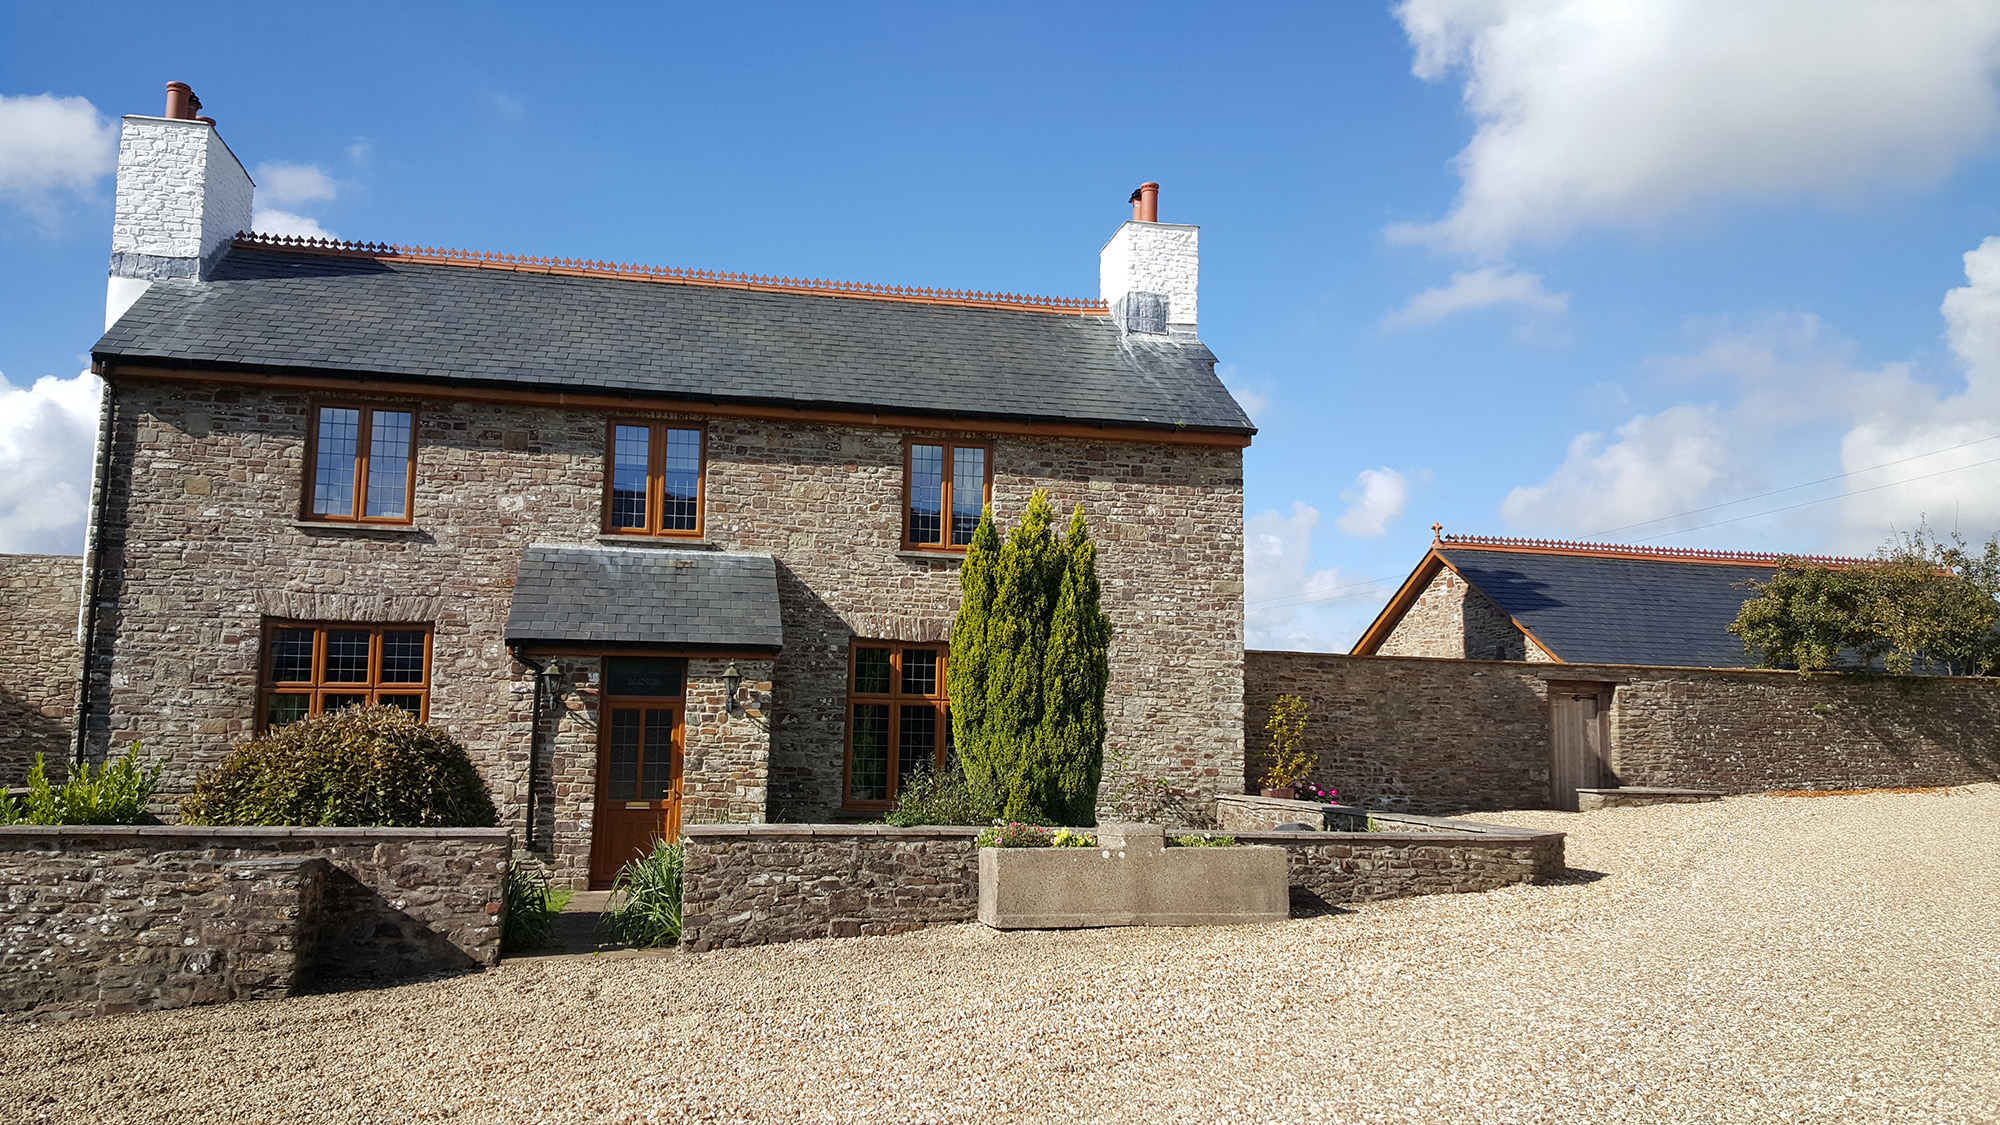 5 bed country house to rent in High Bickington, Devon, EX37